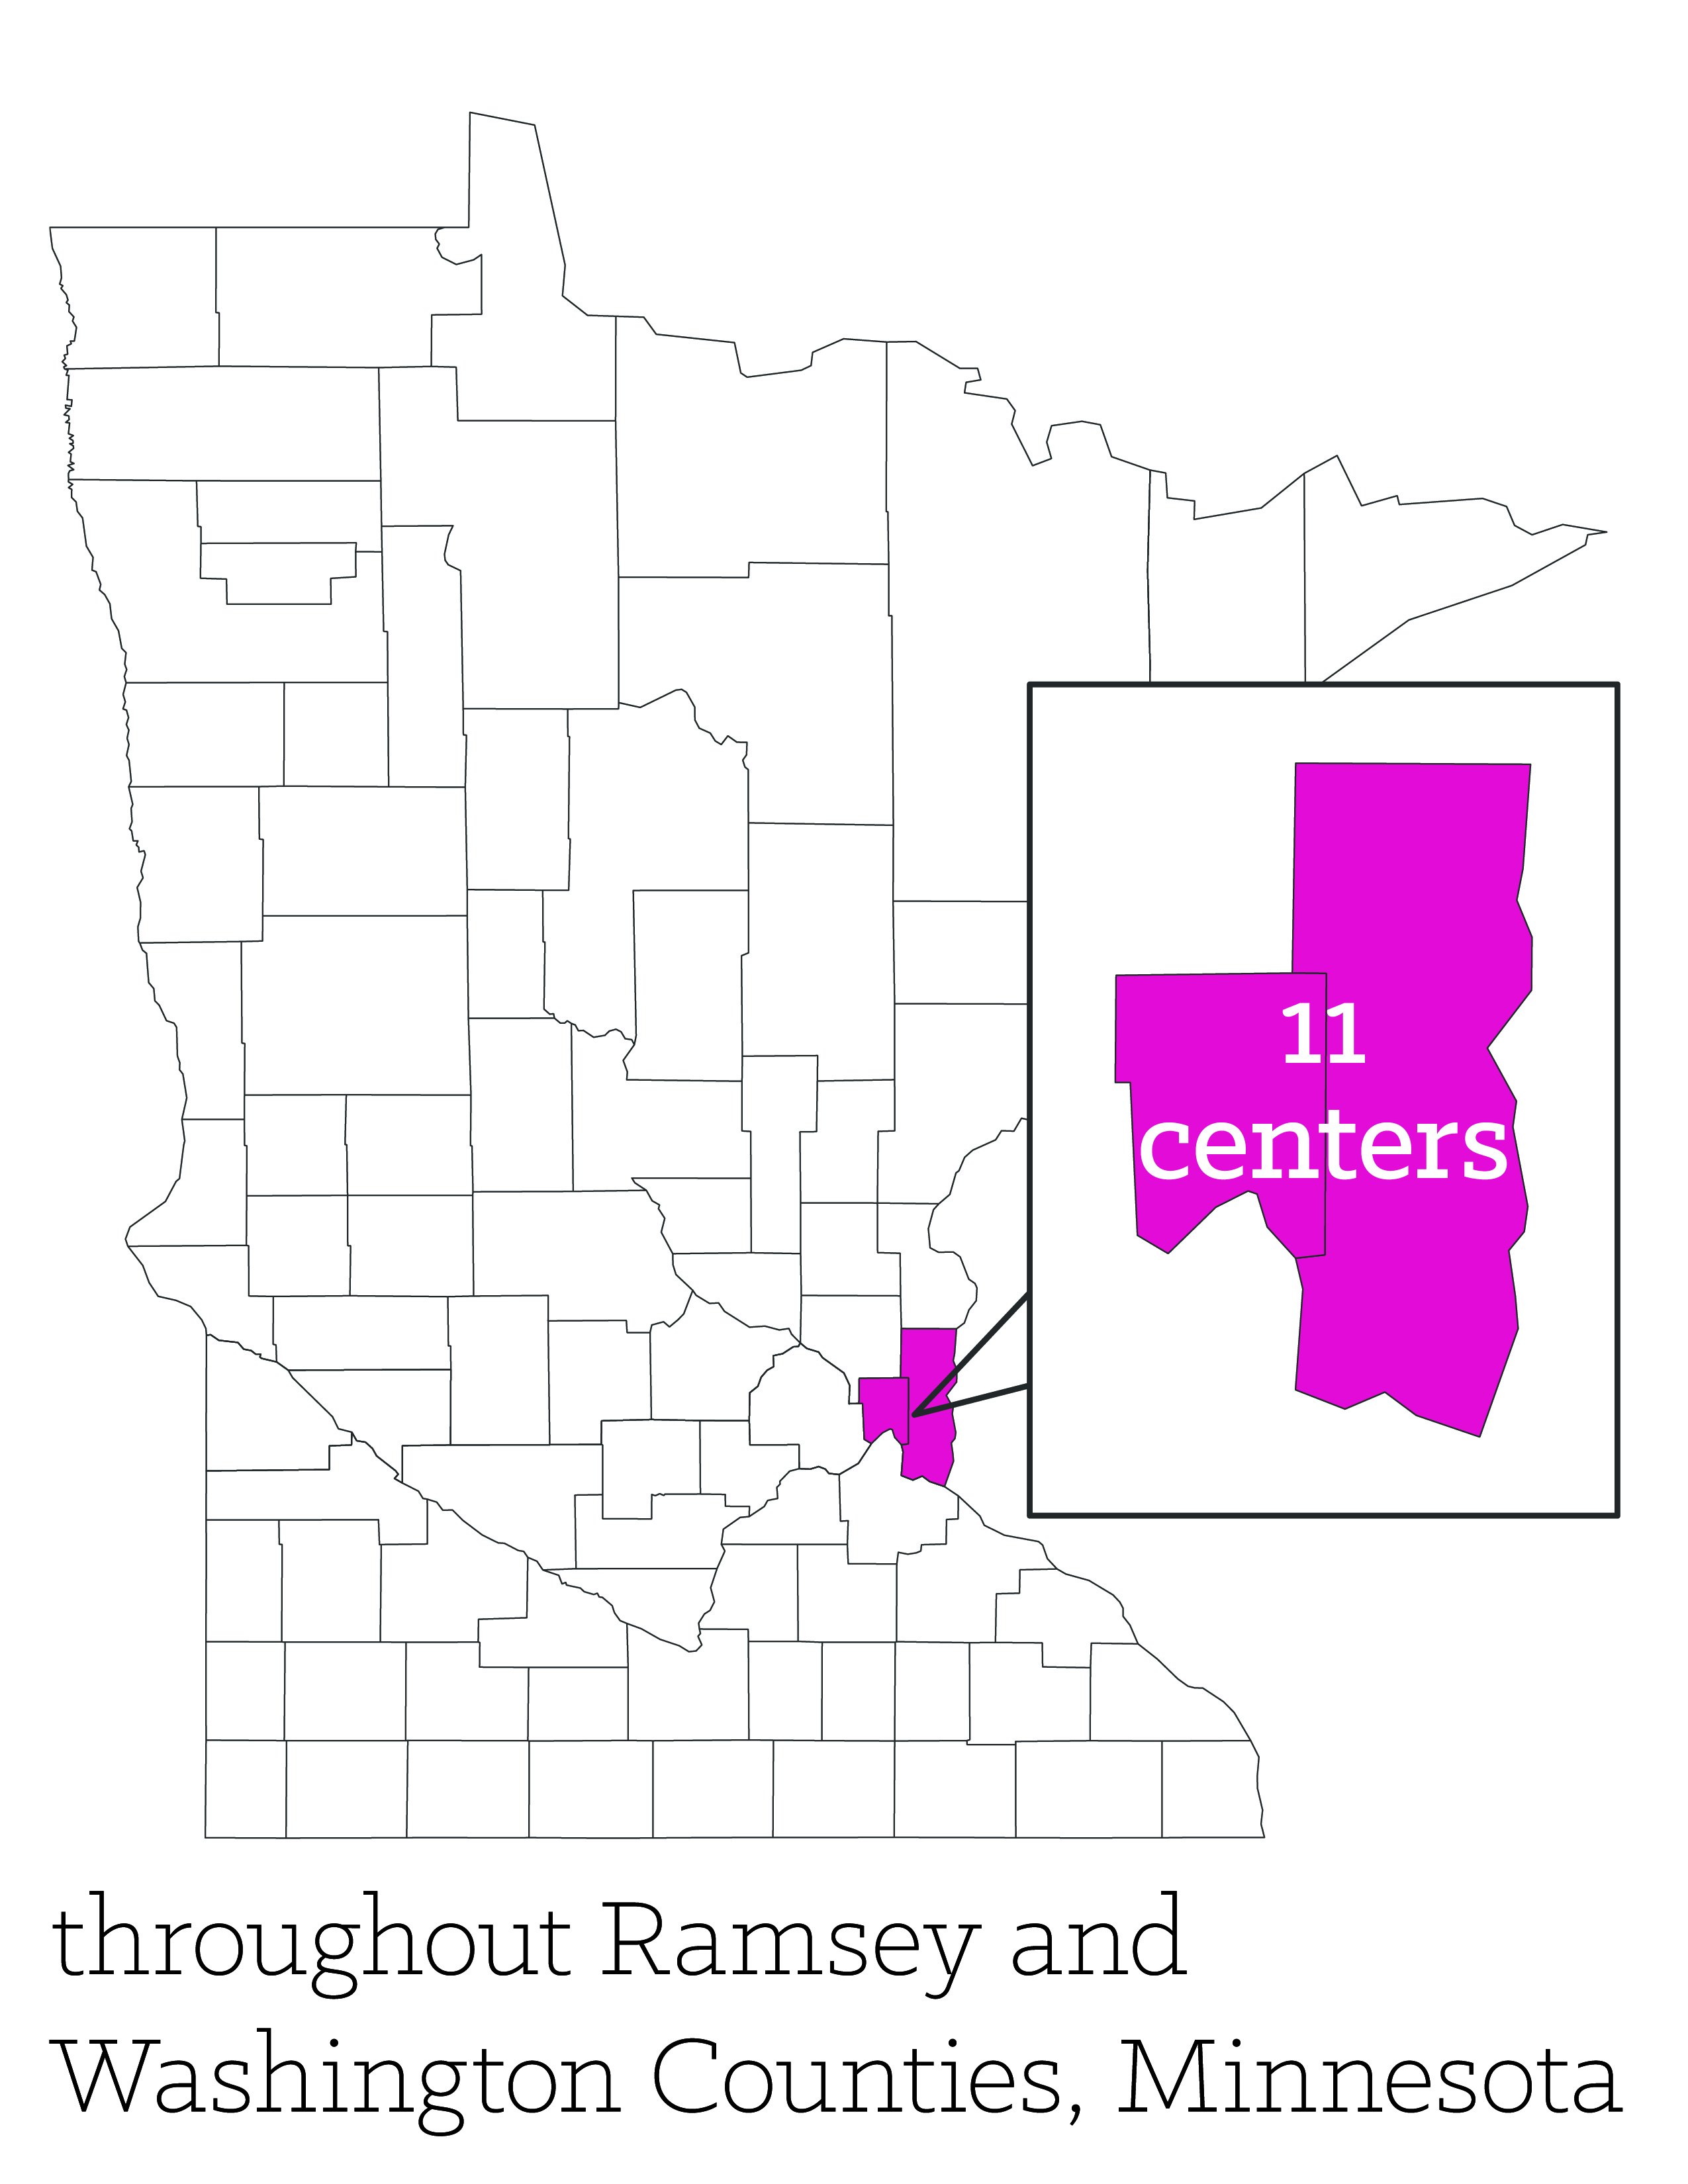 Community Action Partnership of Ramsey and Washington Counties locations in Minnesota